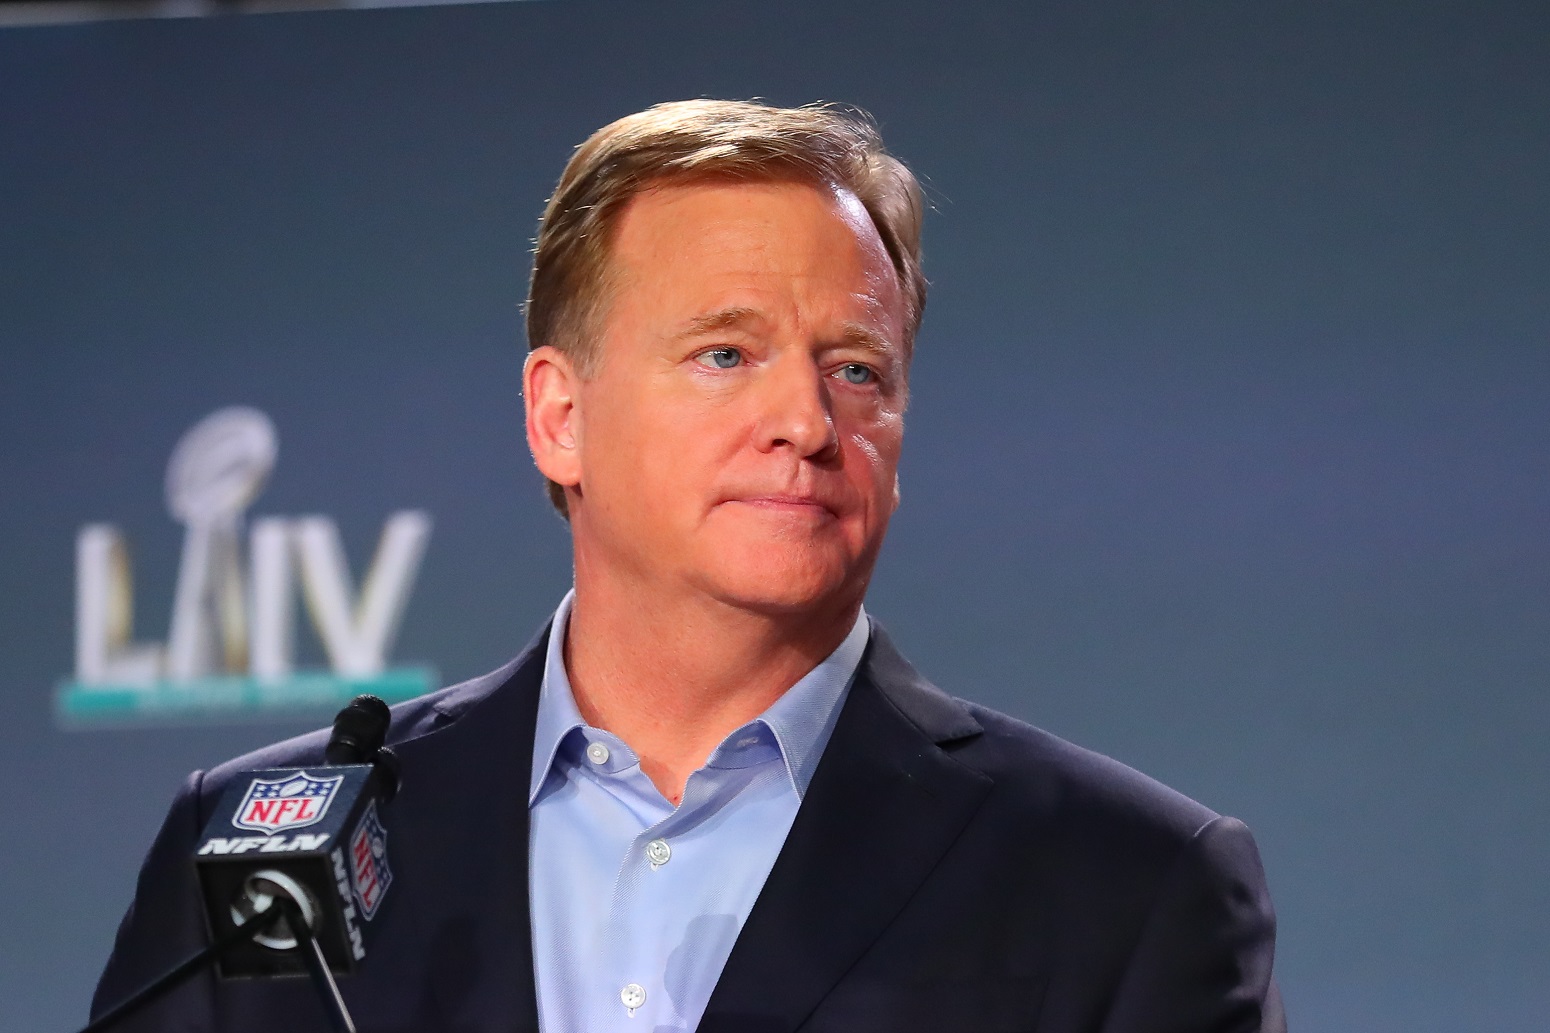 Roger Goodell Sends a Crystal Clear Message of Support to NFL Players